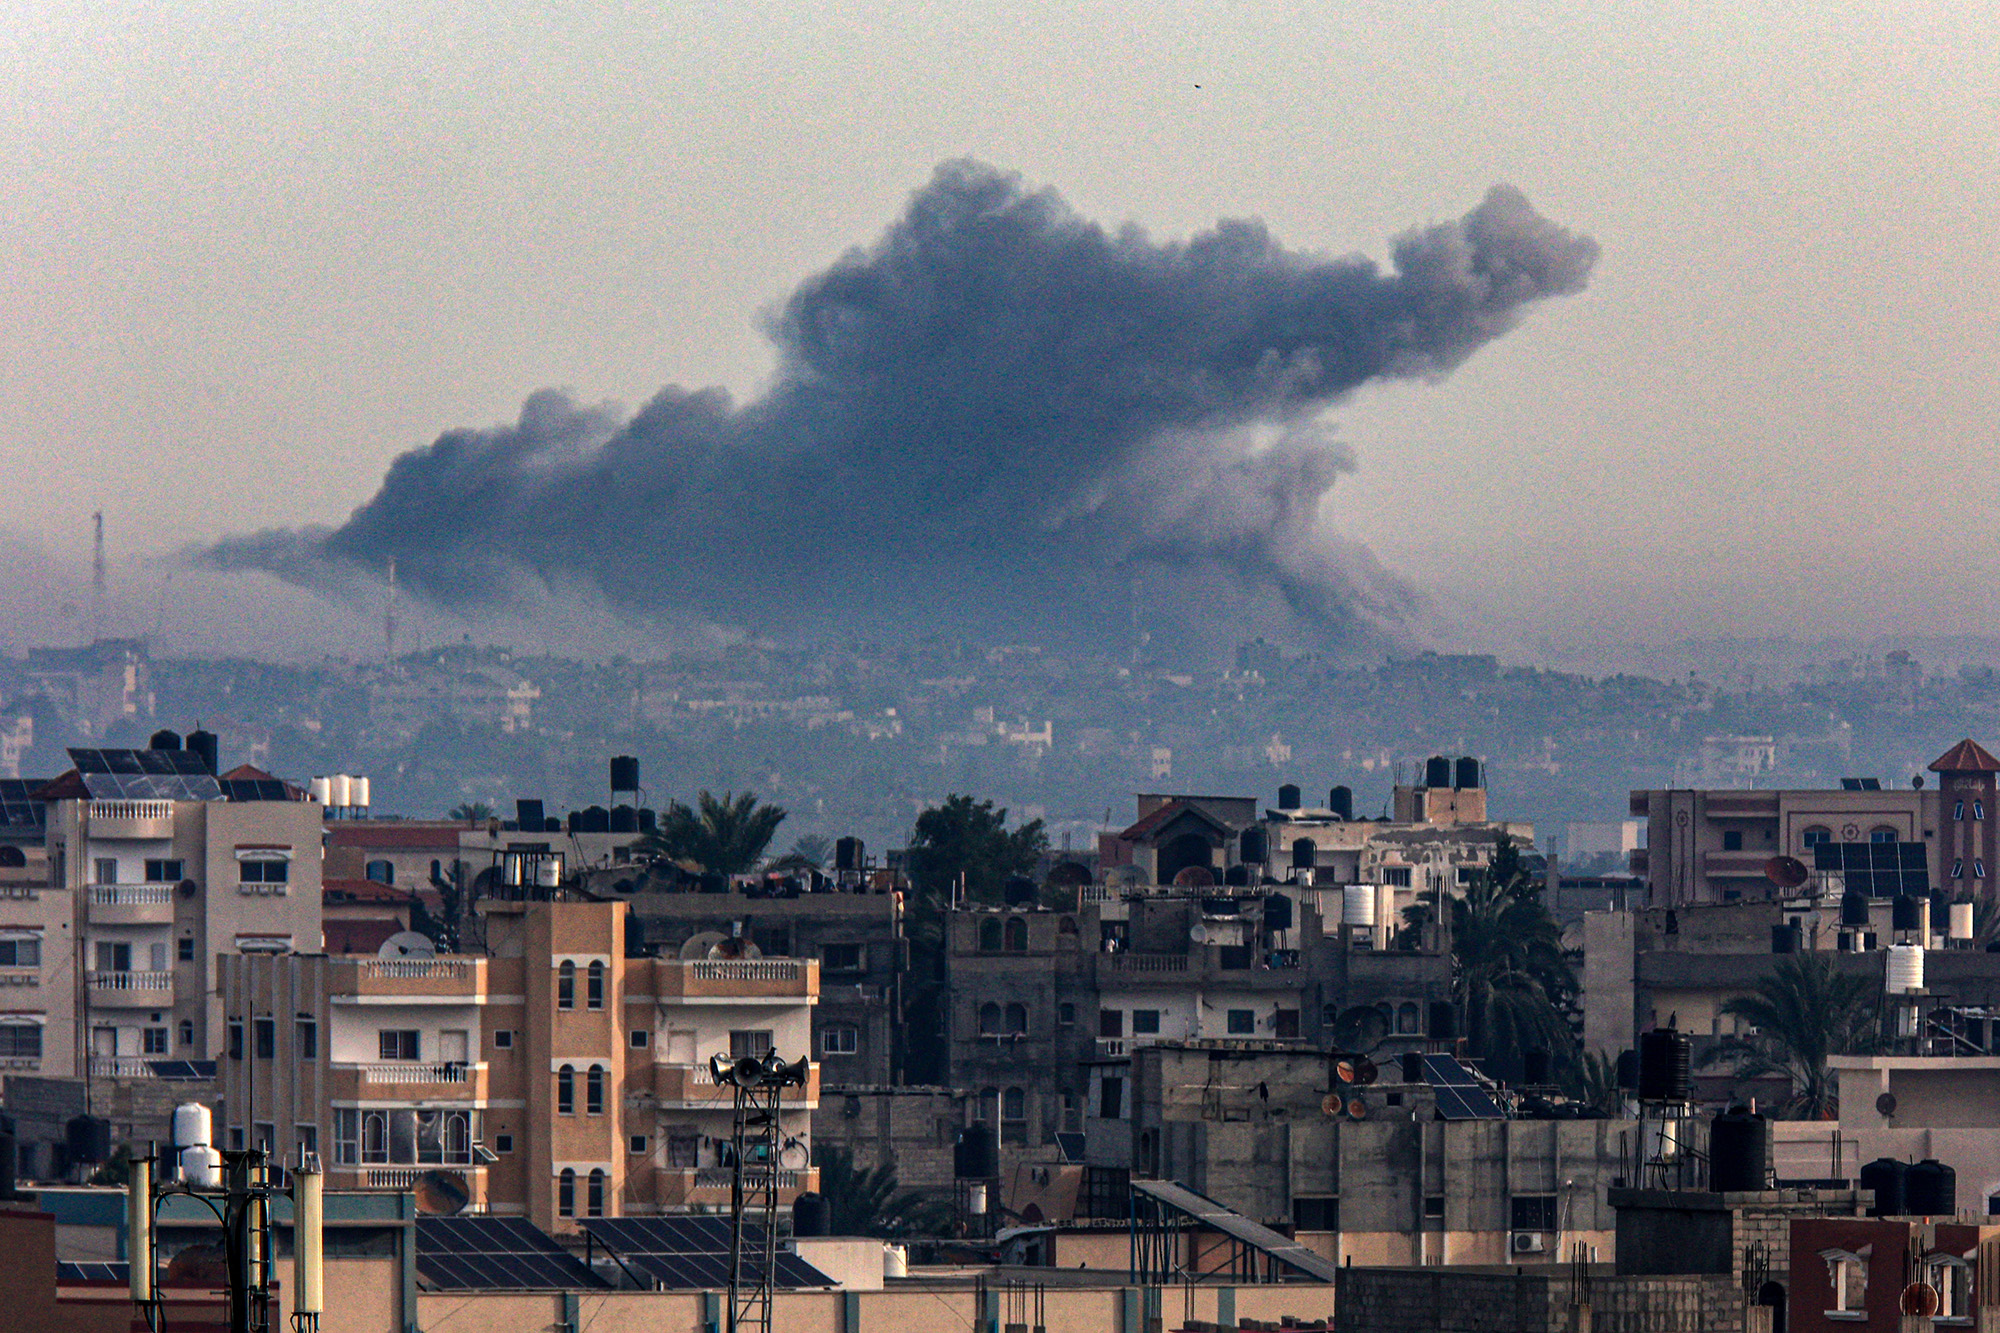 Smoke rises over Khan Younis in southern Gaza during Israeli bombardment on December 20.